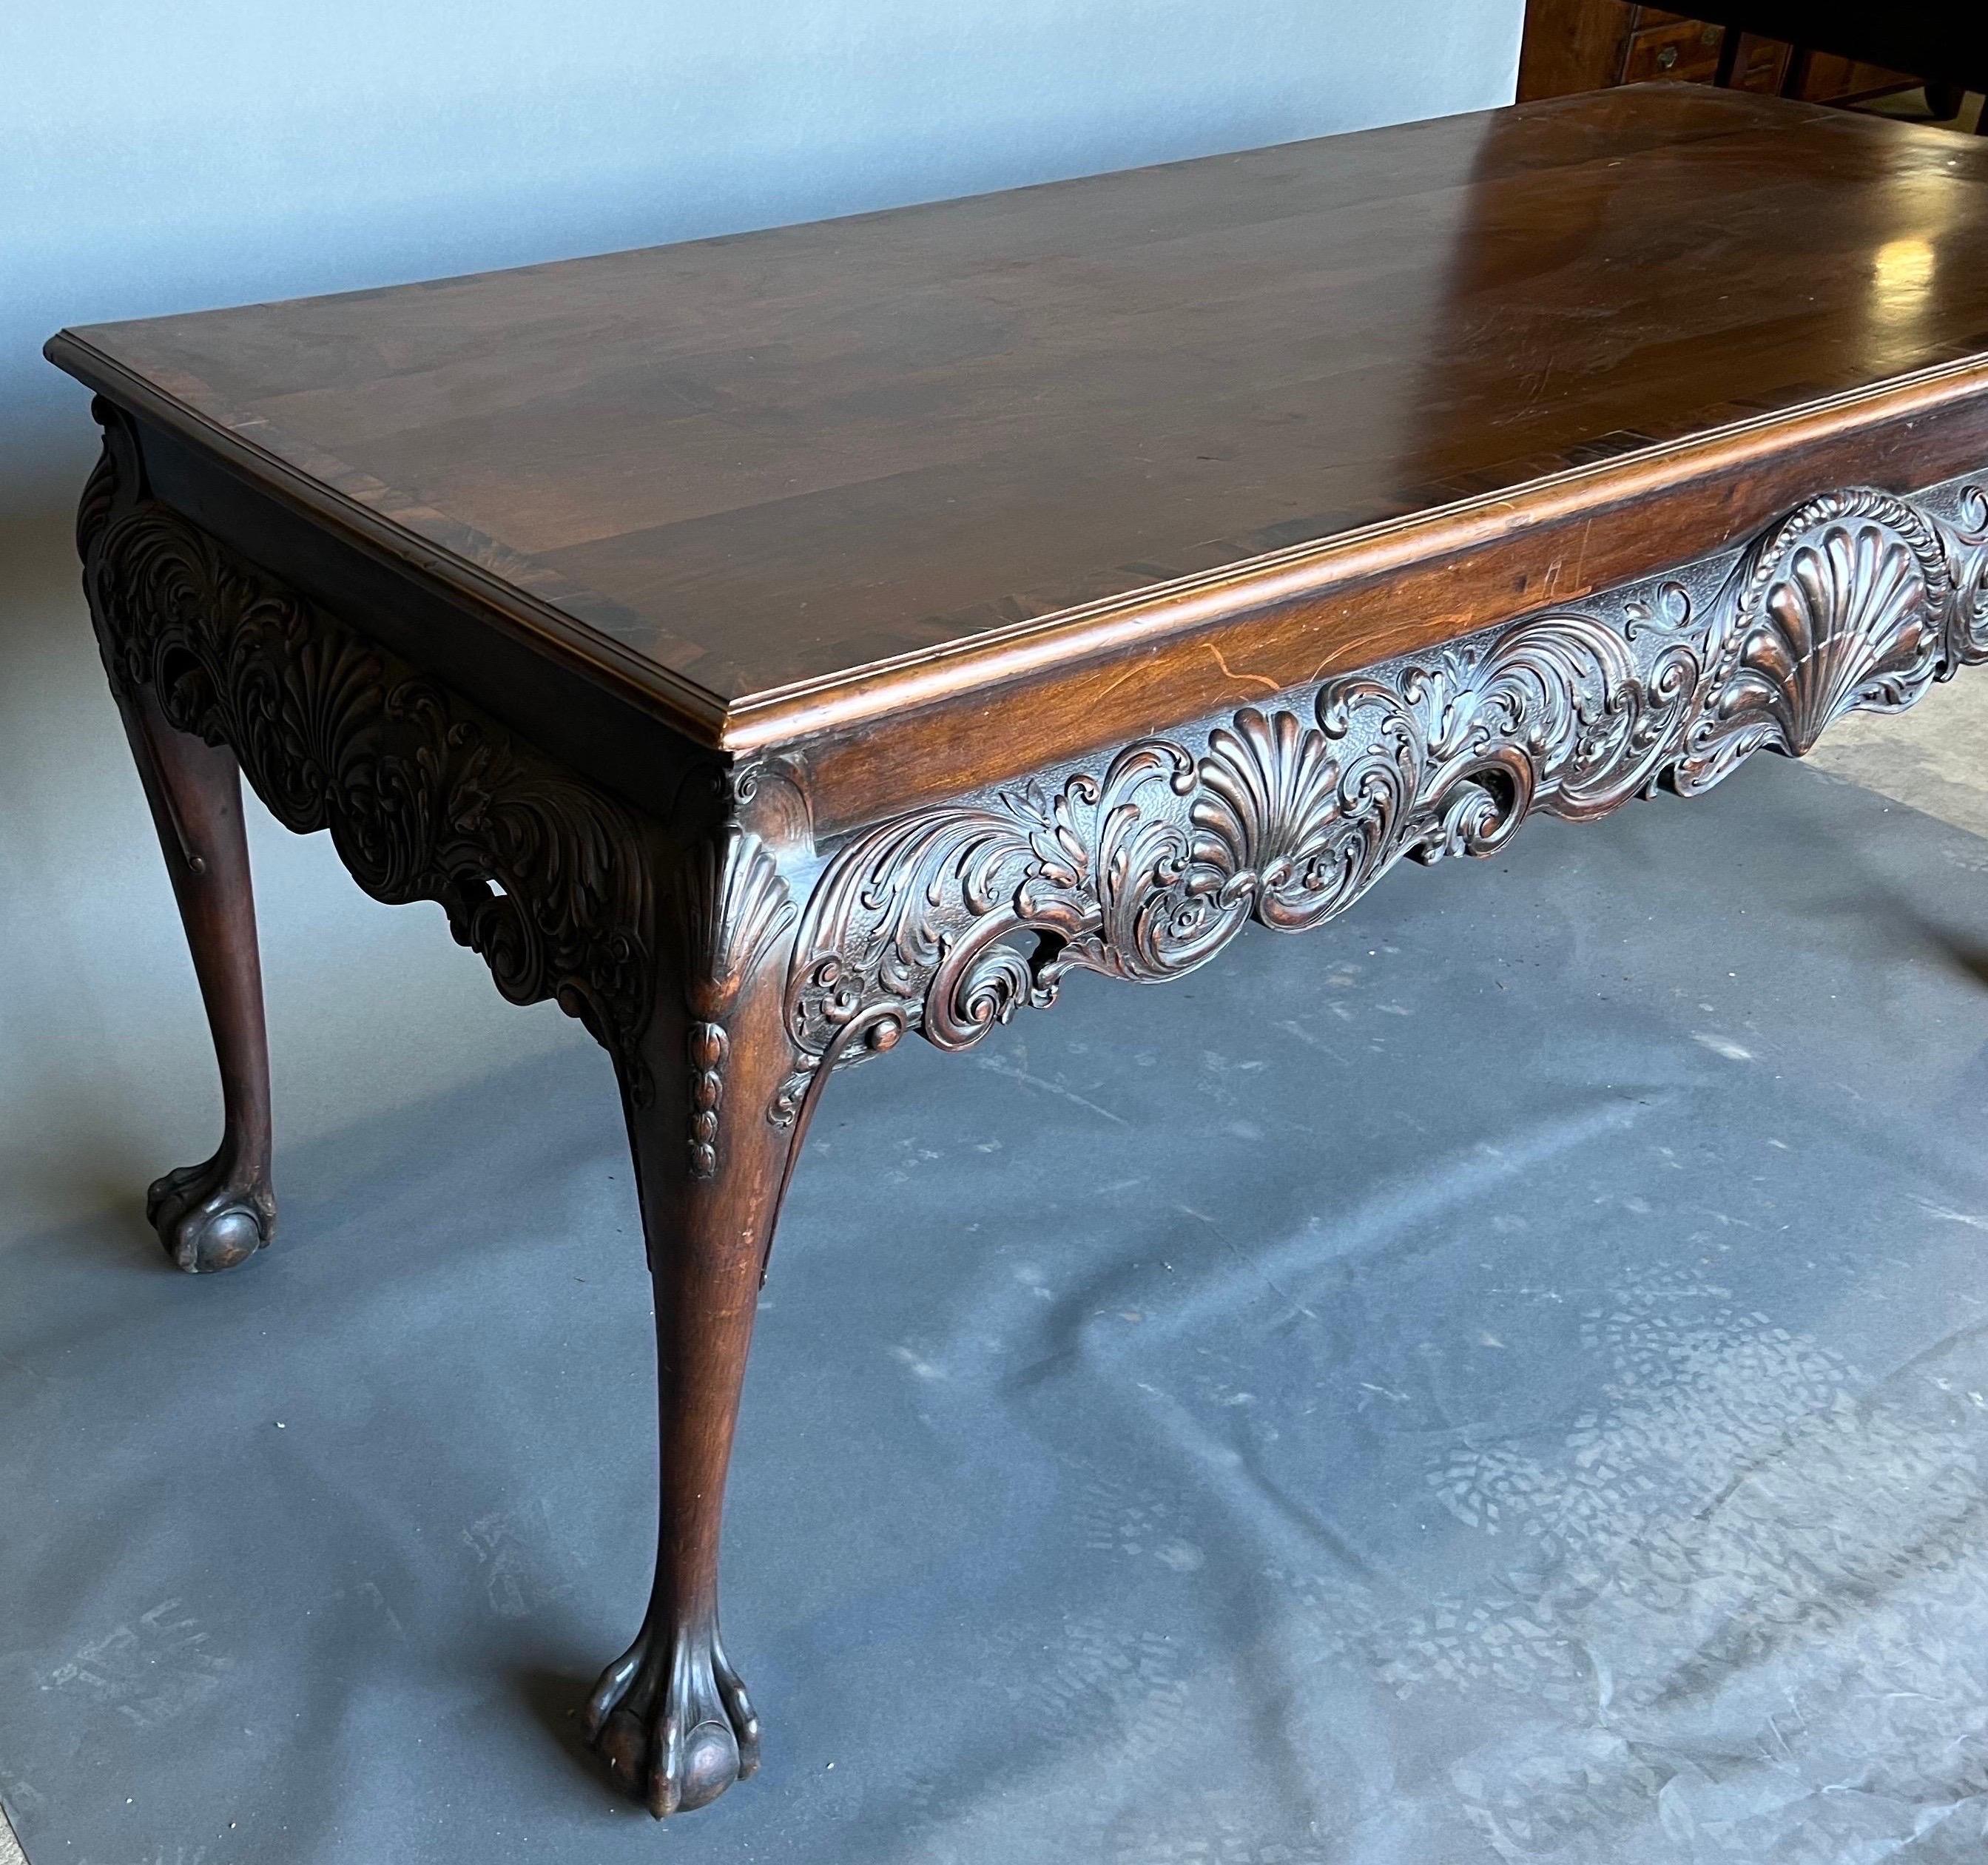 Very fine 19th century mahogany console table stamped by Gillows. Beautiful form and presence on this signed Gillows piece. The top is cross banded mahogany. Incredible quality hand carved shells, acanthus leaves and feathering centers the piece